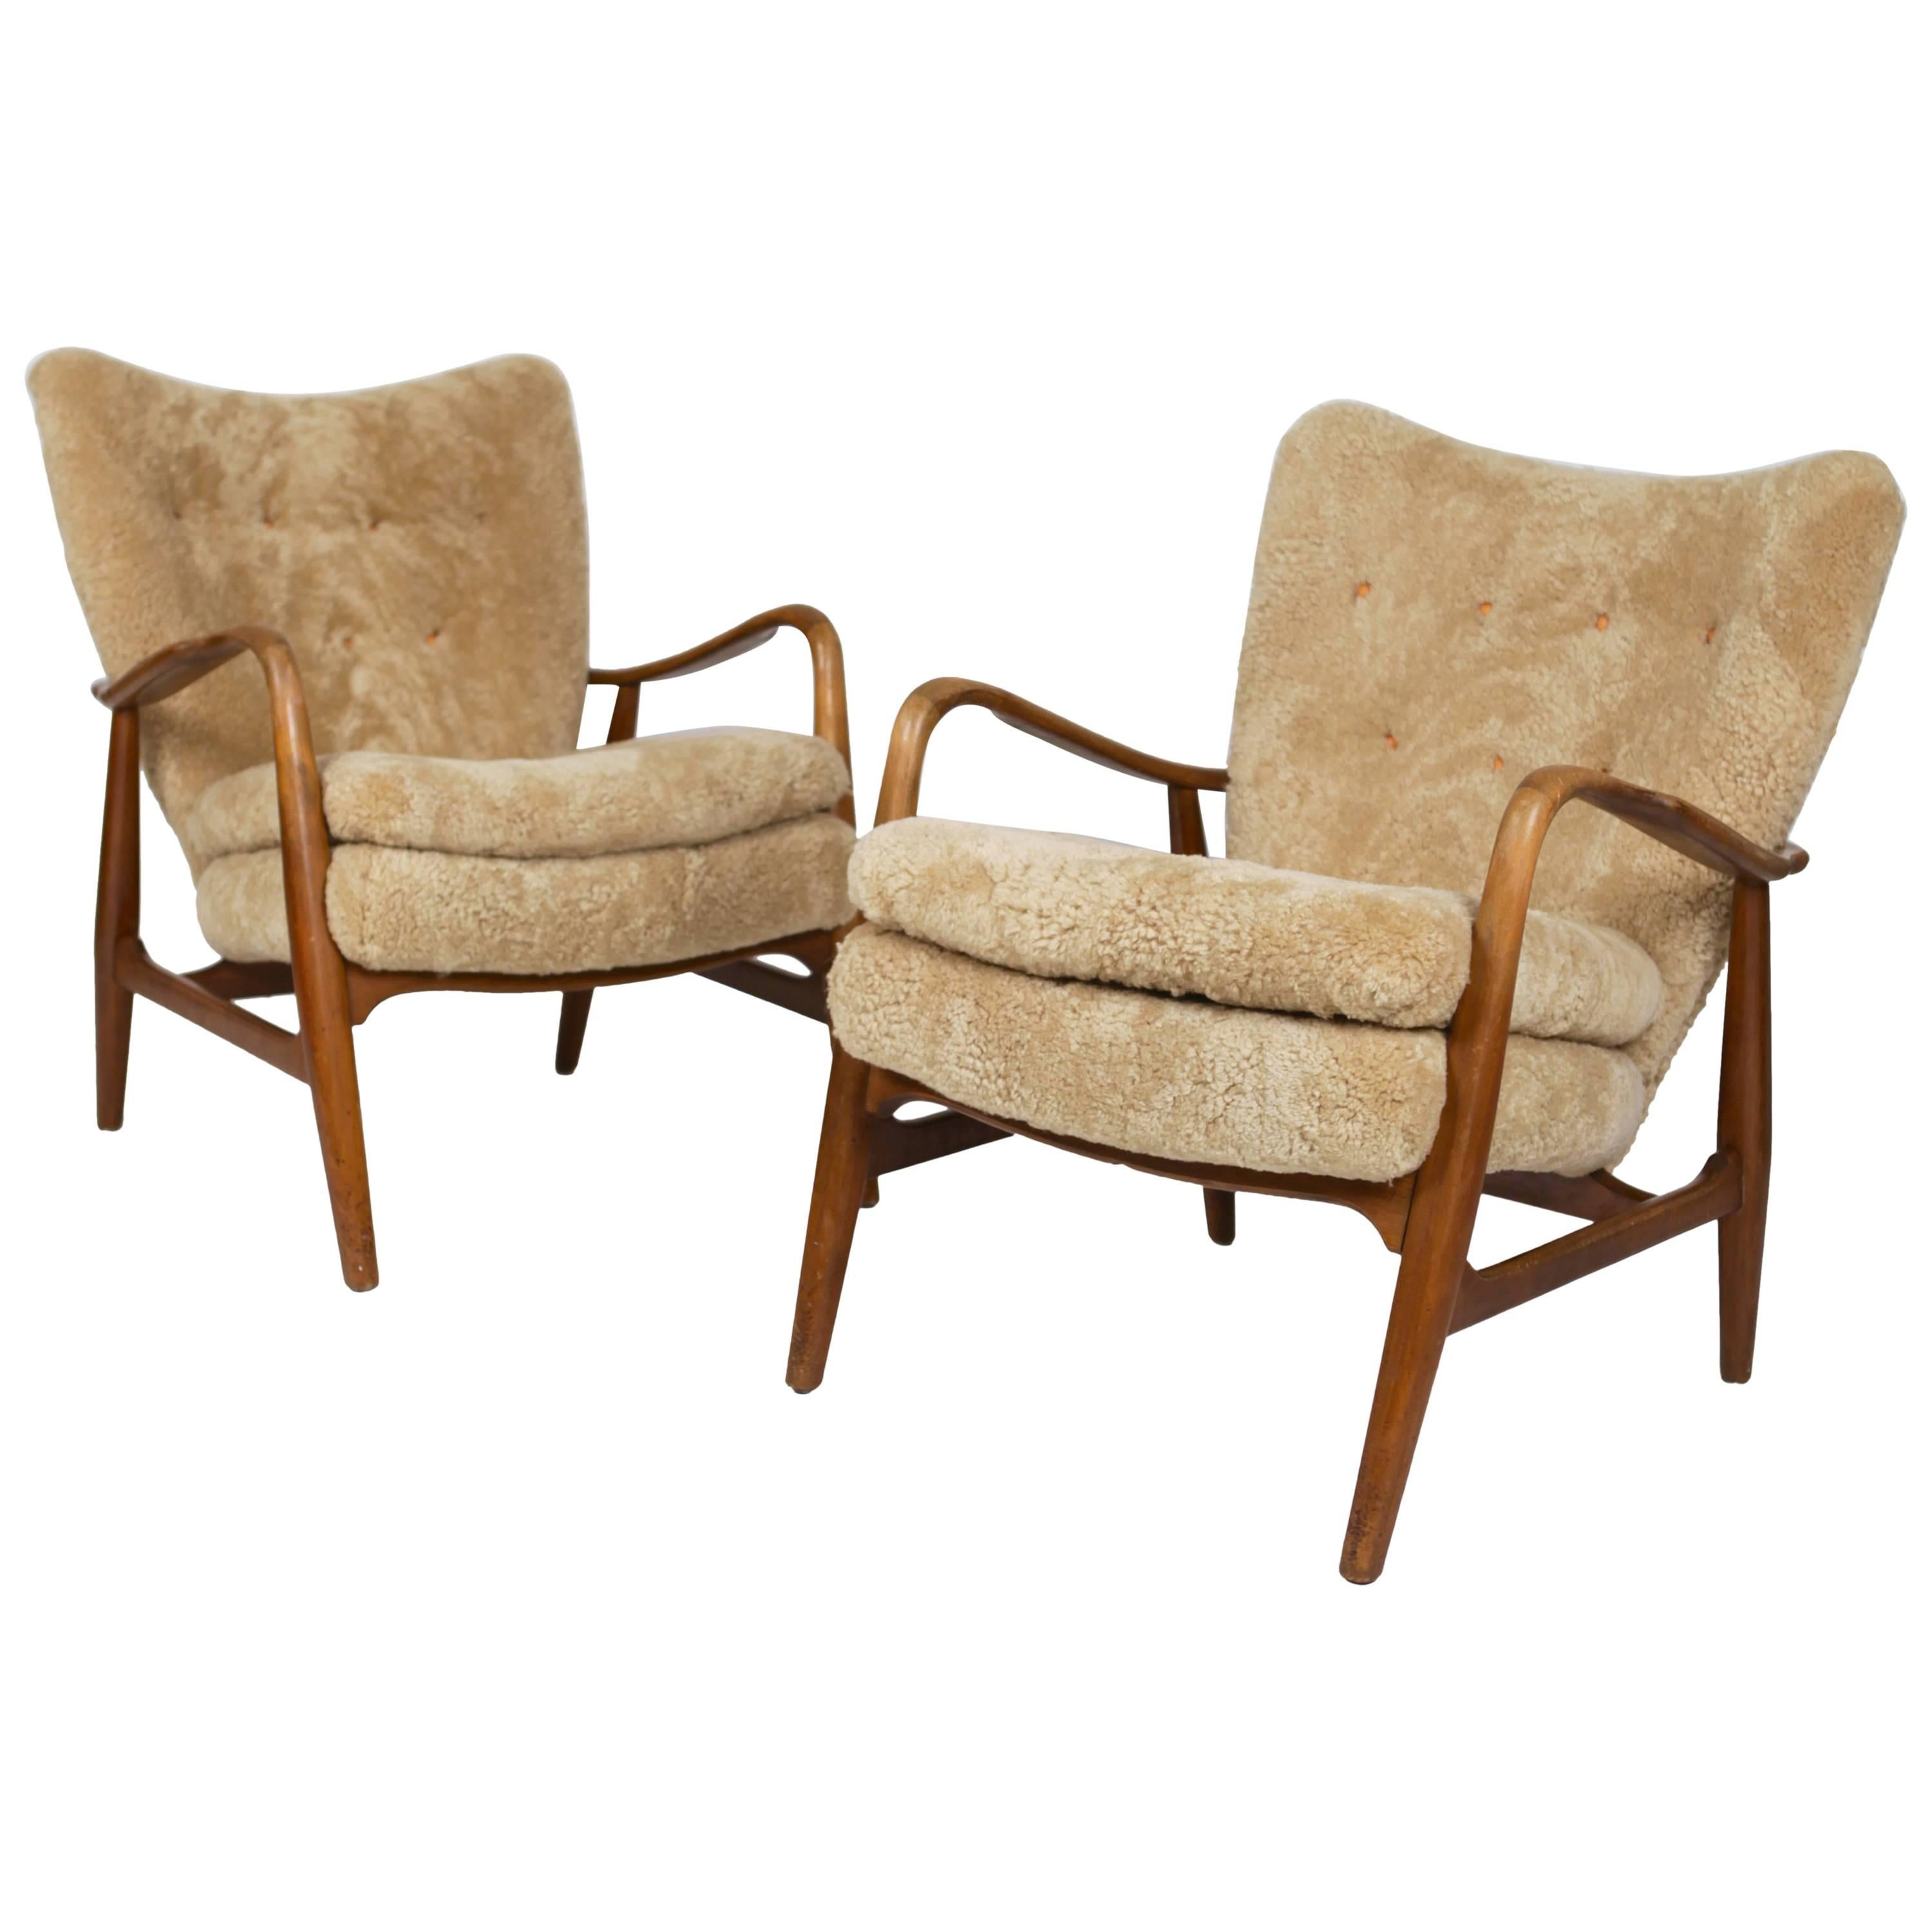 Pair of Rare Easy Chairs with Footstool by Acton Schubell & Ib Madsen